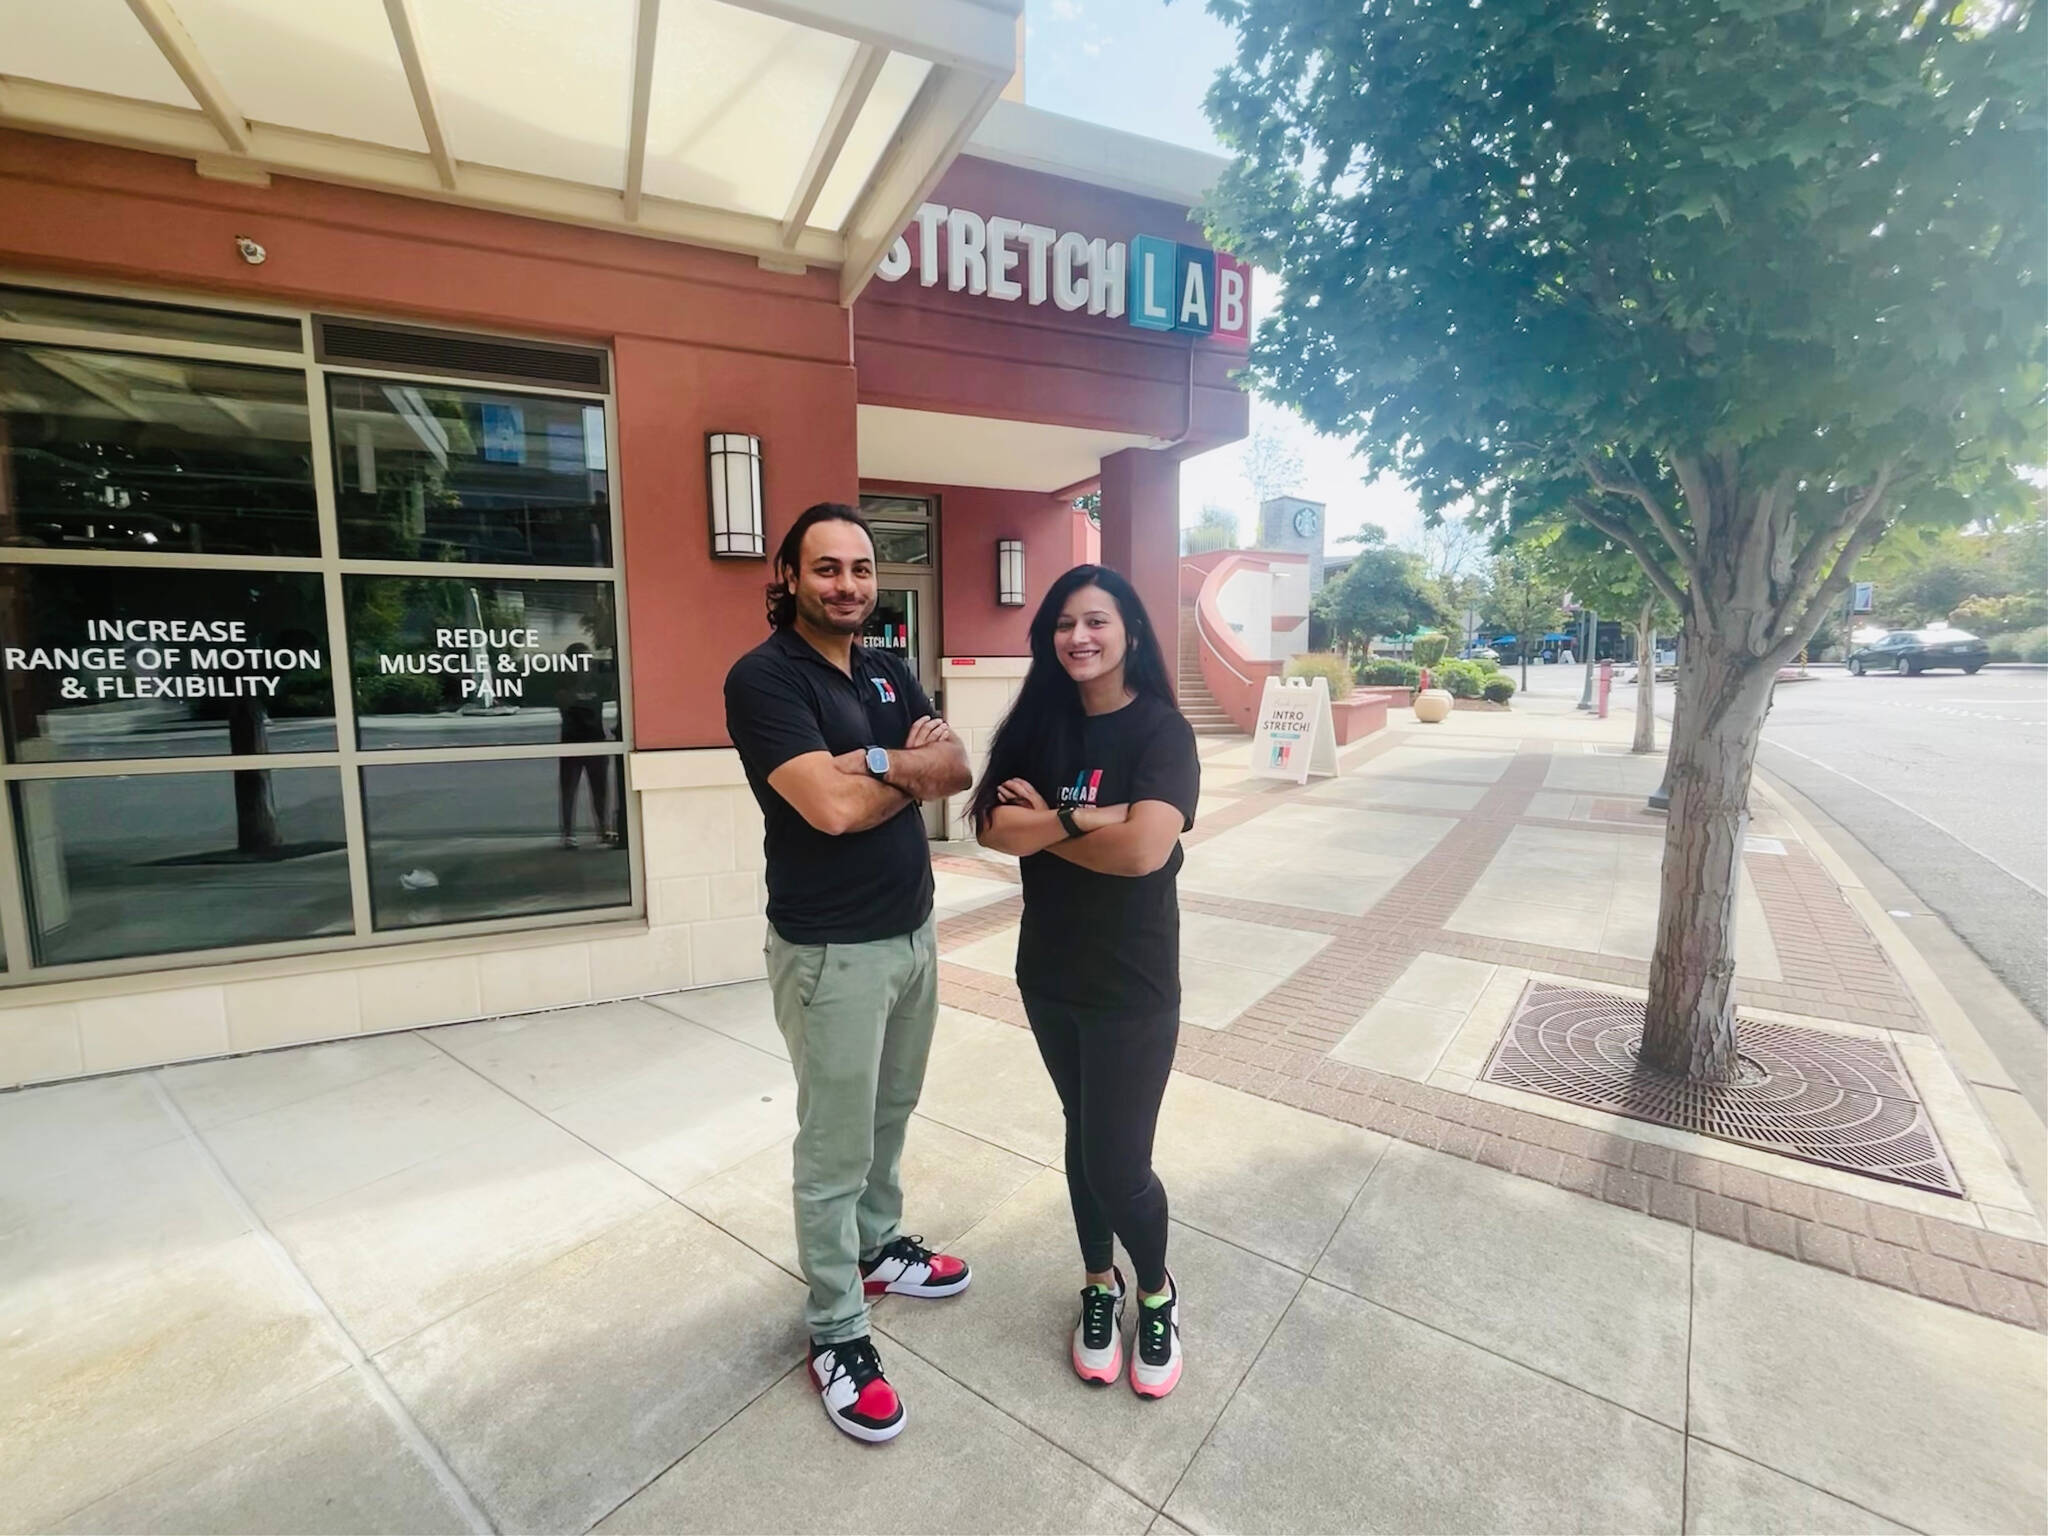 Raj Sharma and Arushi Upadhyay are the owners and operators of Mercer Island StretchLab. Photo courtesy of Mercer Island StretchLab